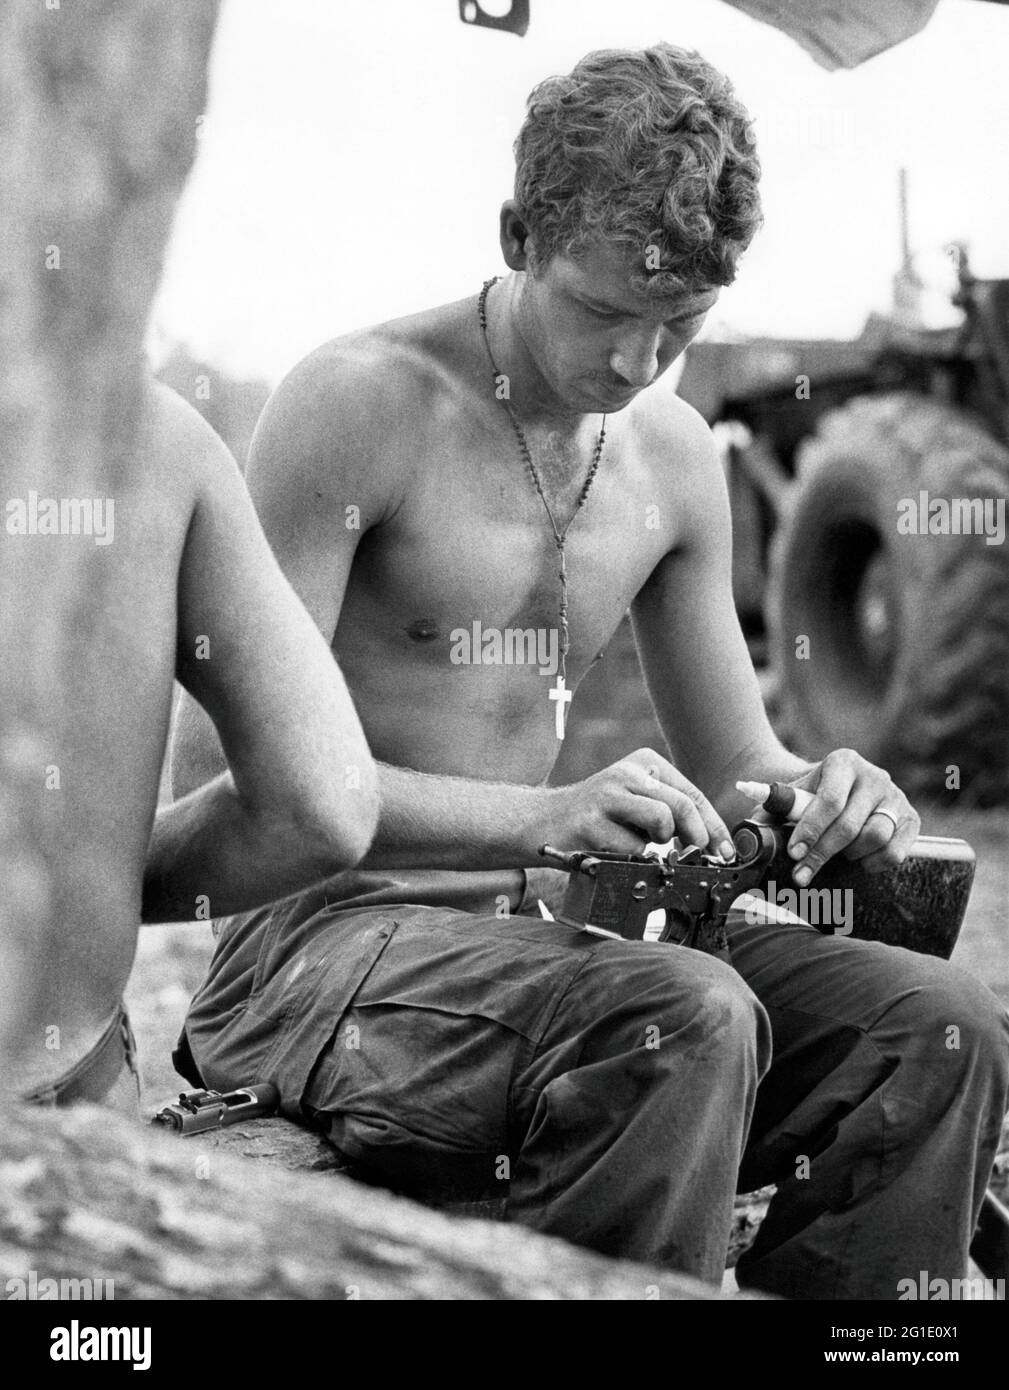 geography/travel, Asia, Vietnam, Viet Nam, War, US soldier, cleaning his M-16 assault rifle, ADDITIONAL-RIGHTS-CLEARANCE-INFO-NOT-AVAILABLE Stock Photo